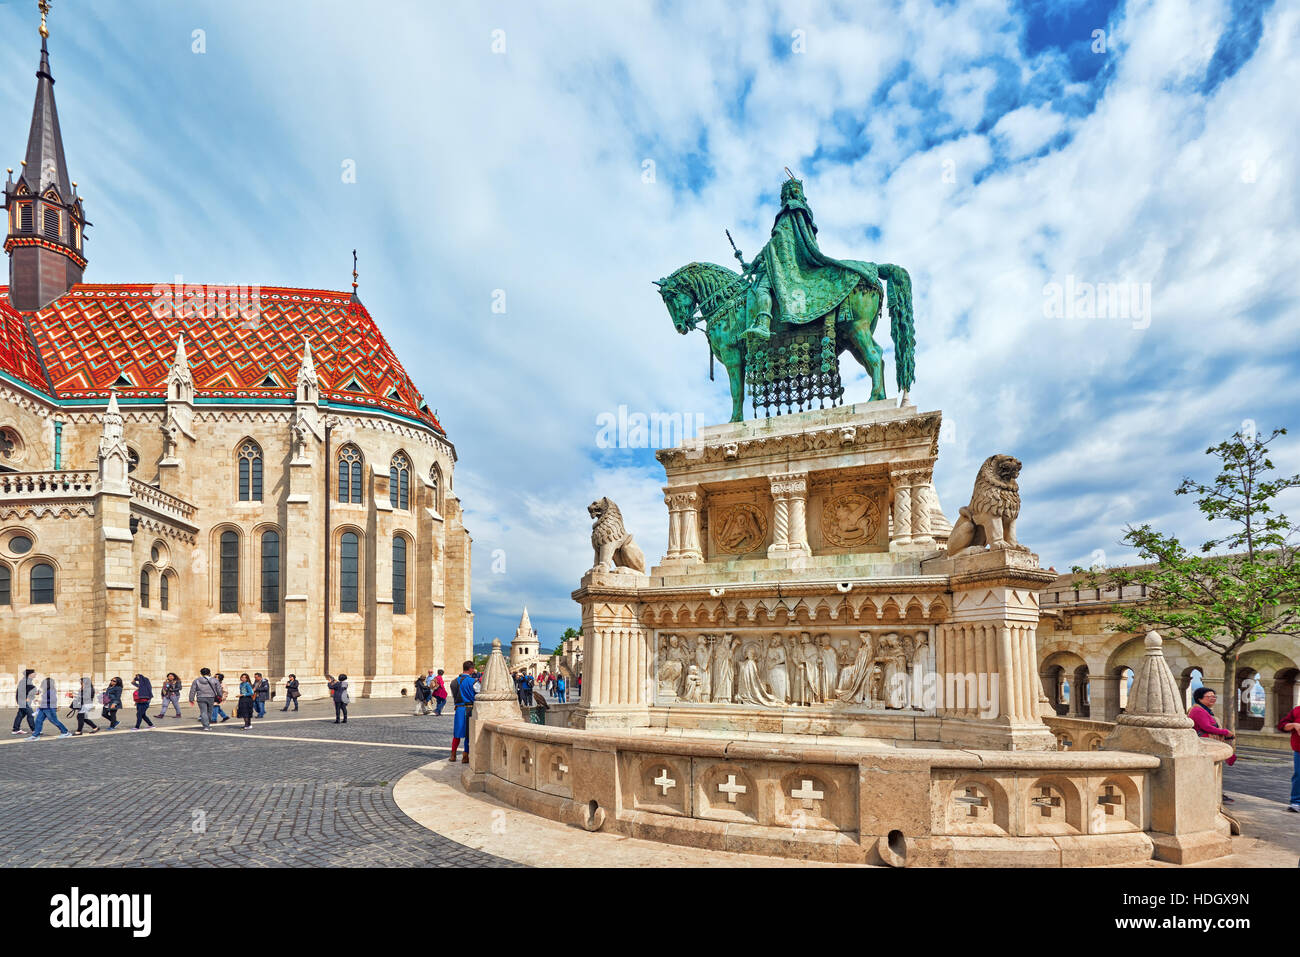 BUDAPEST, HUNGARY-MAY 03, 2016: View on the Old Fisherman Bastion in Budapest. Statue Saint Istvan and people near. Hungary. Stock Photo